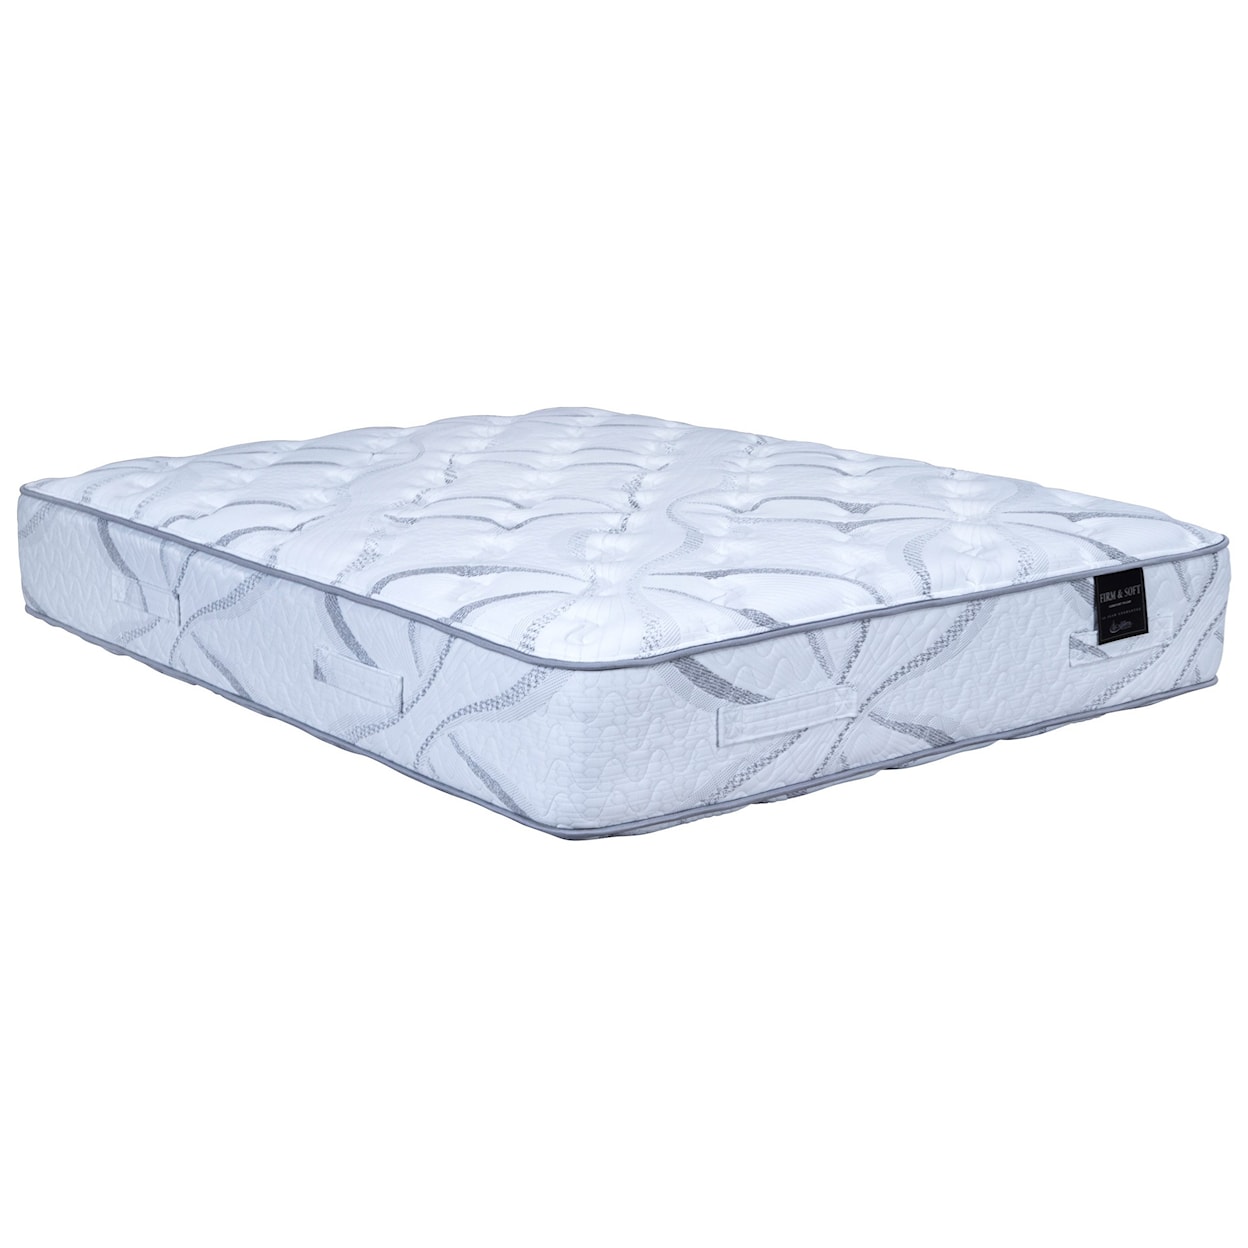 Capitol Bedding Firm and Soft II Plush Twin Two Sided Plush Mattress